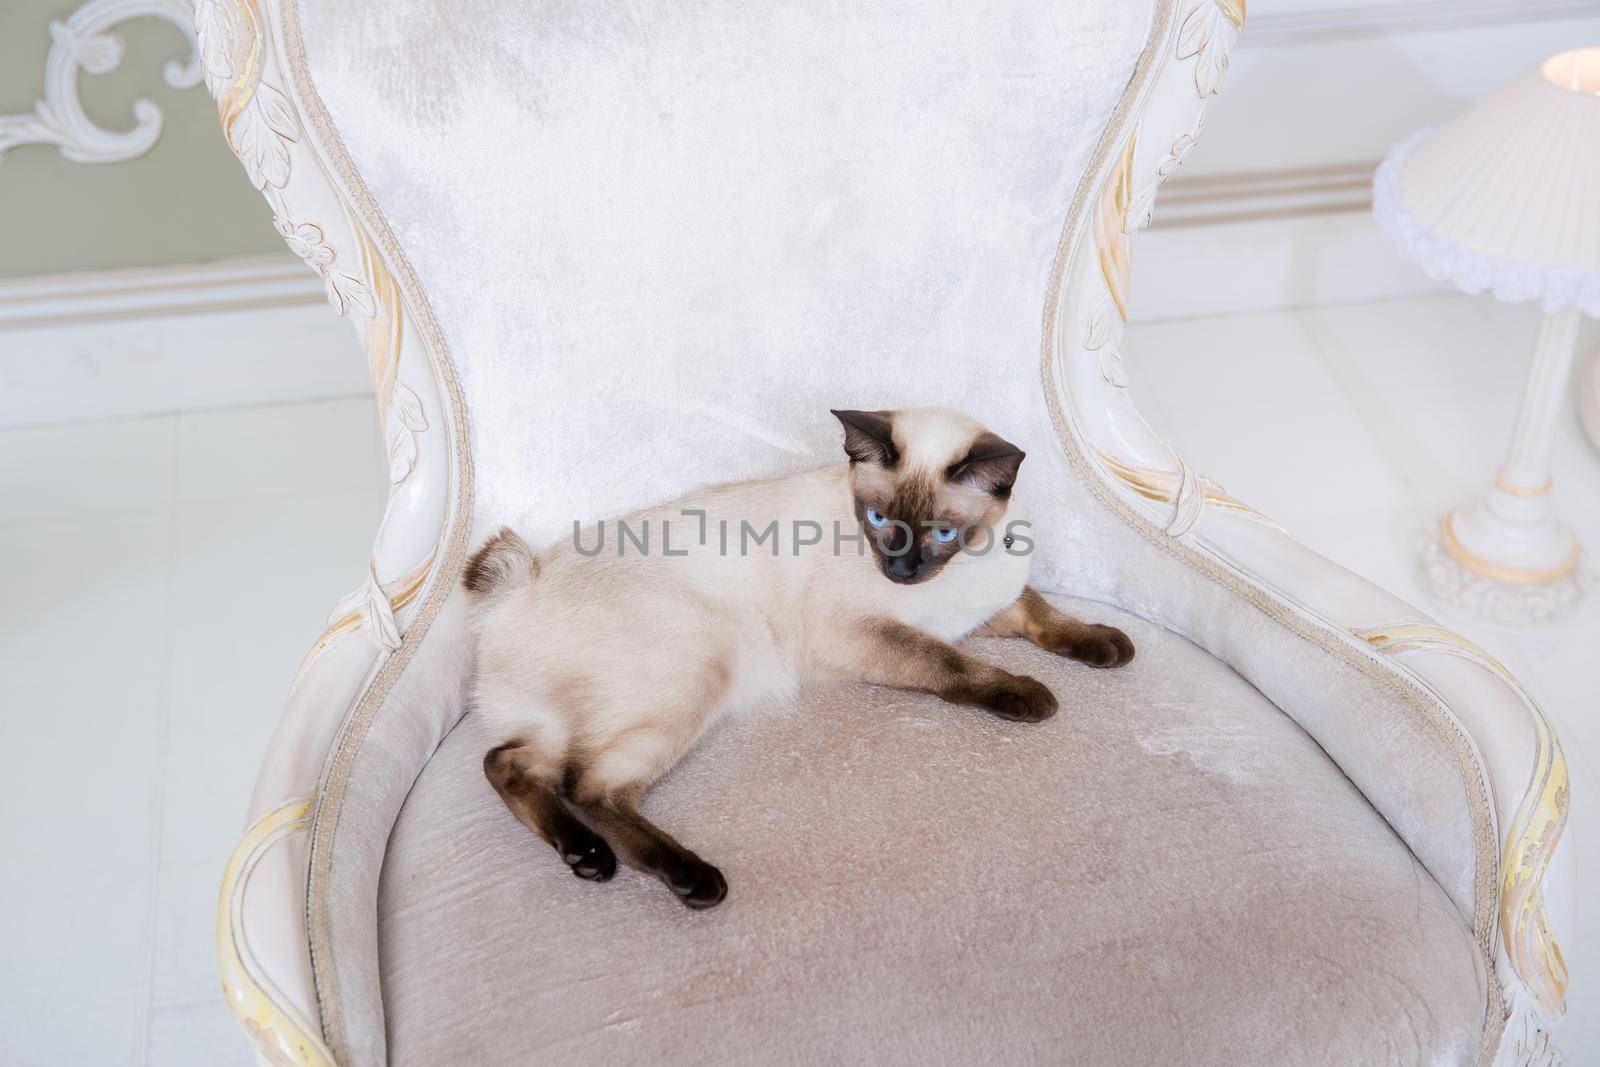 The theme of wealth and luxury. The impudent narcissistic cat of breed Mekong Bobtail poses on a vinage chair in an expensive interior. Thai cat with no tail and jewelry. Decoration on the neck by Tomashevska